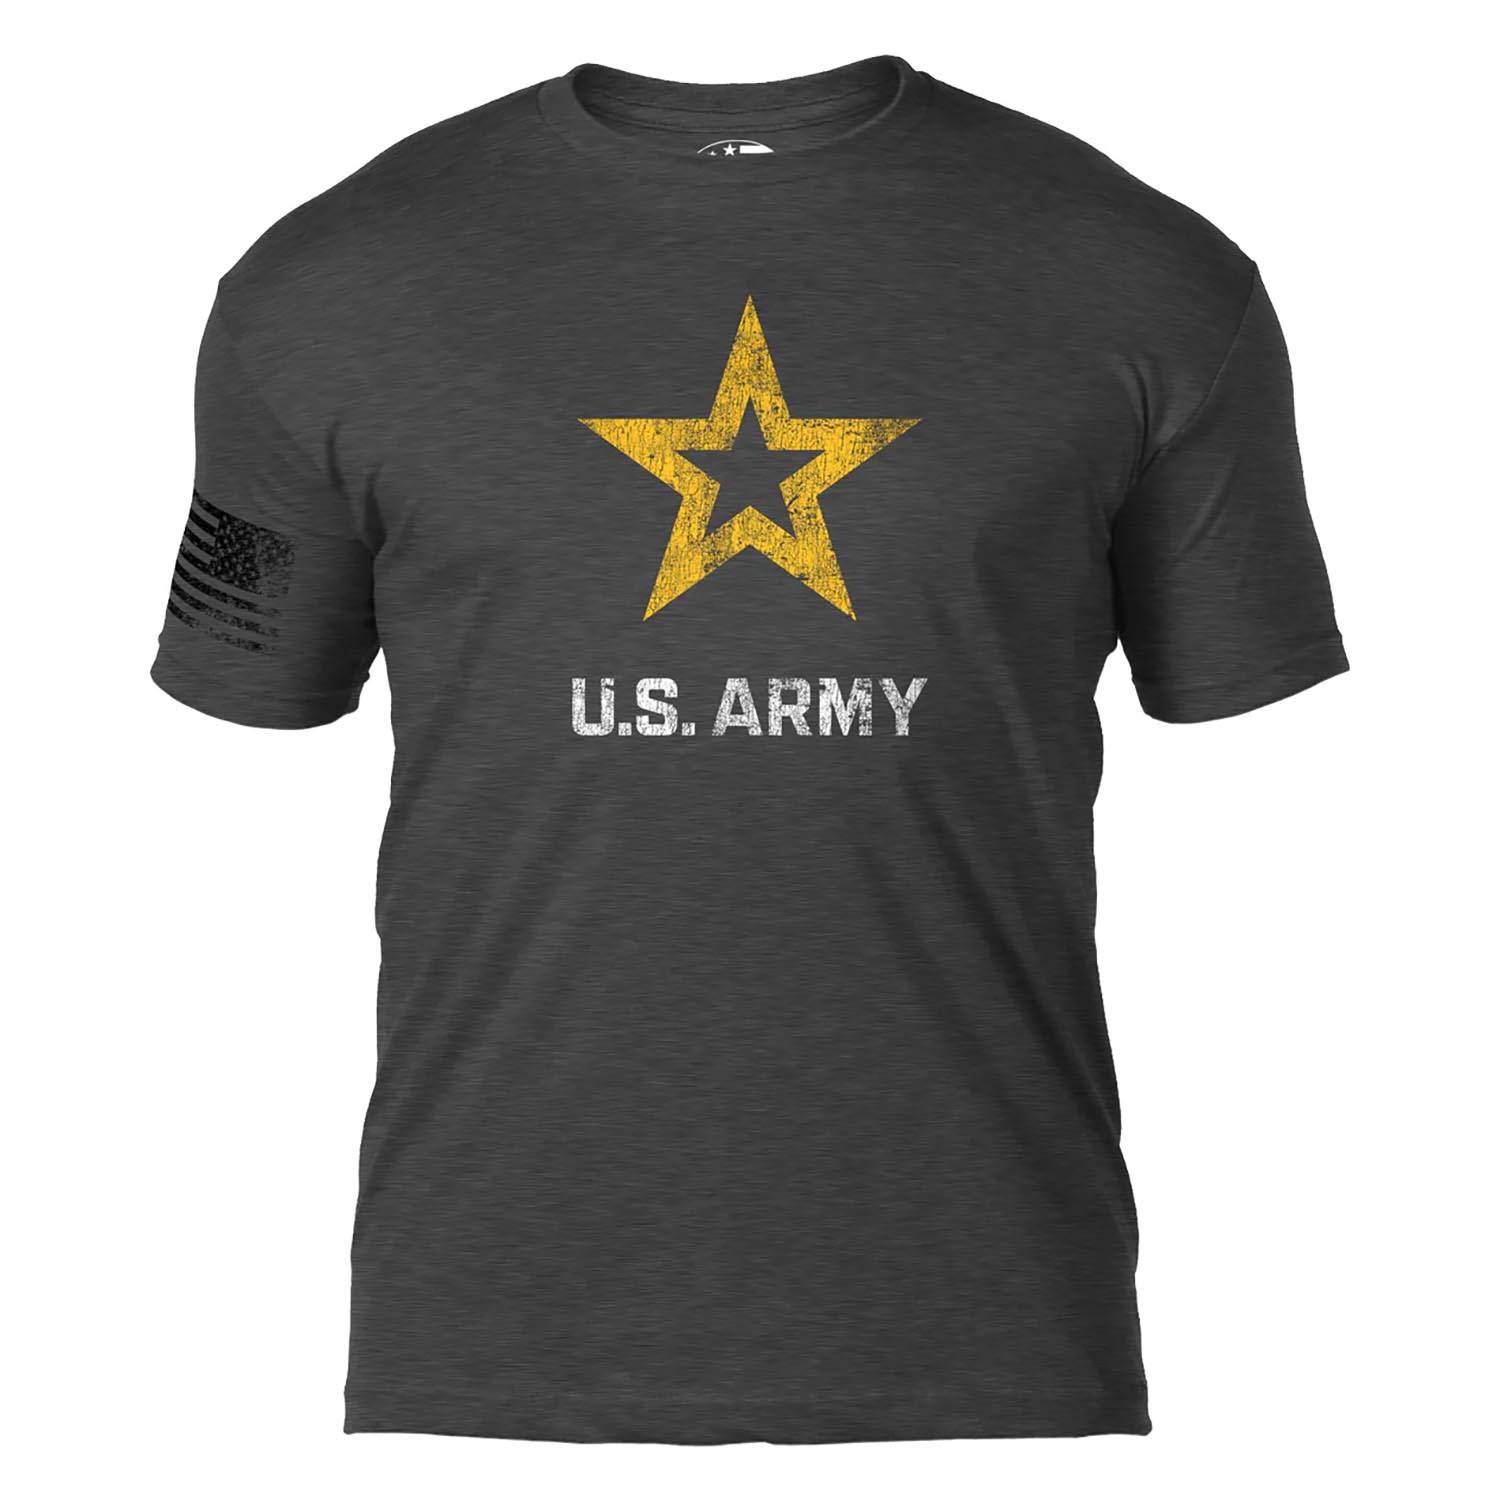 7.62 Design Army Distressed Logo Graphic T-Shirt